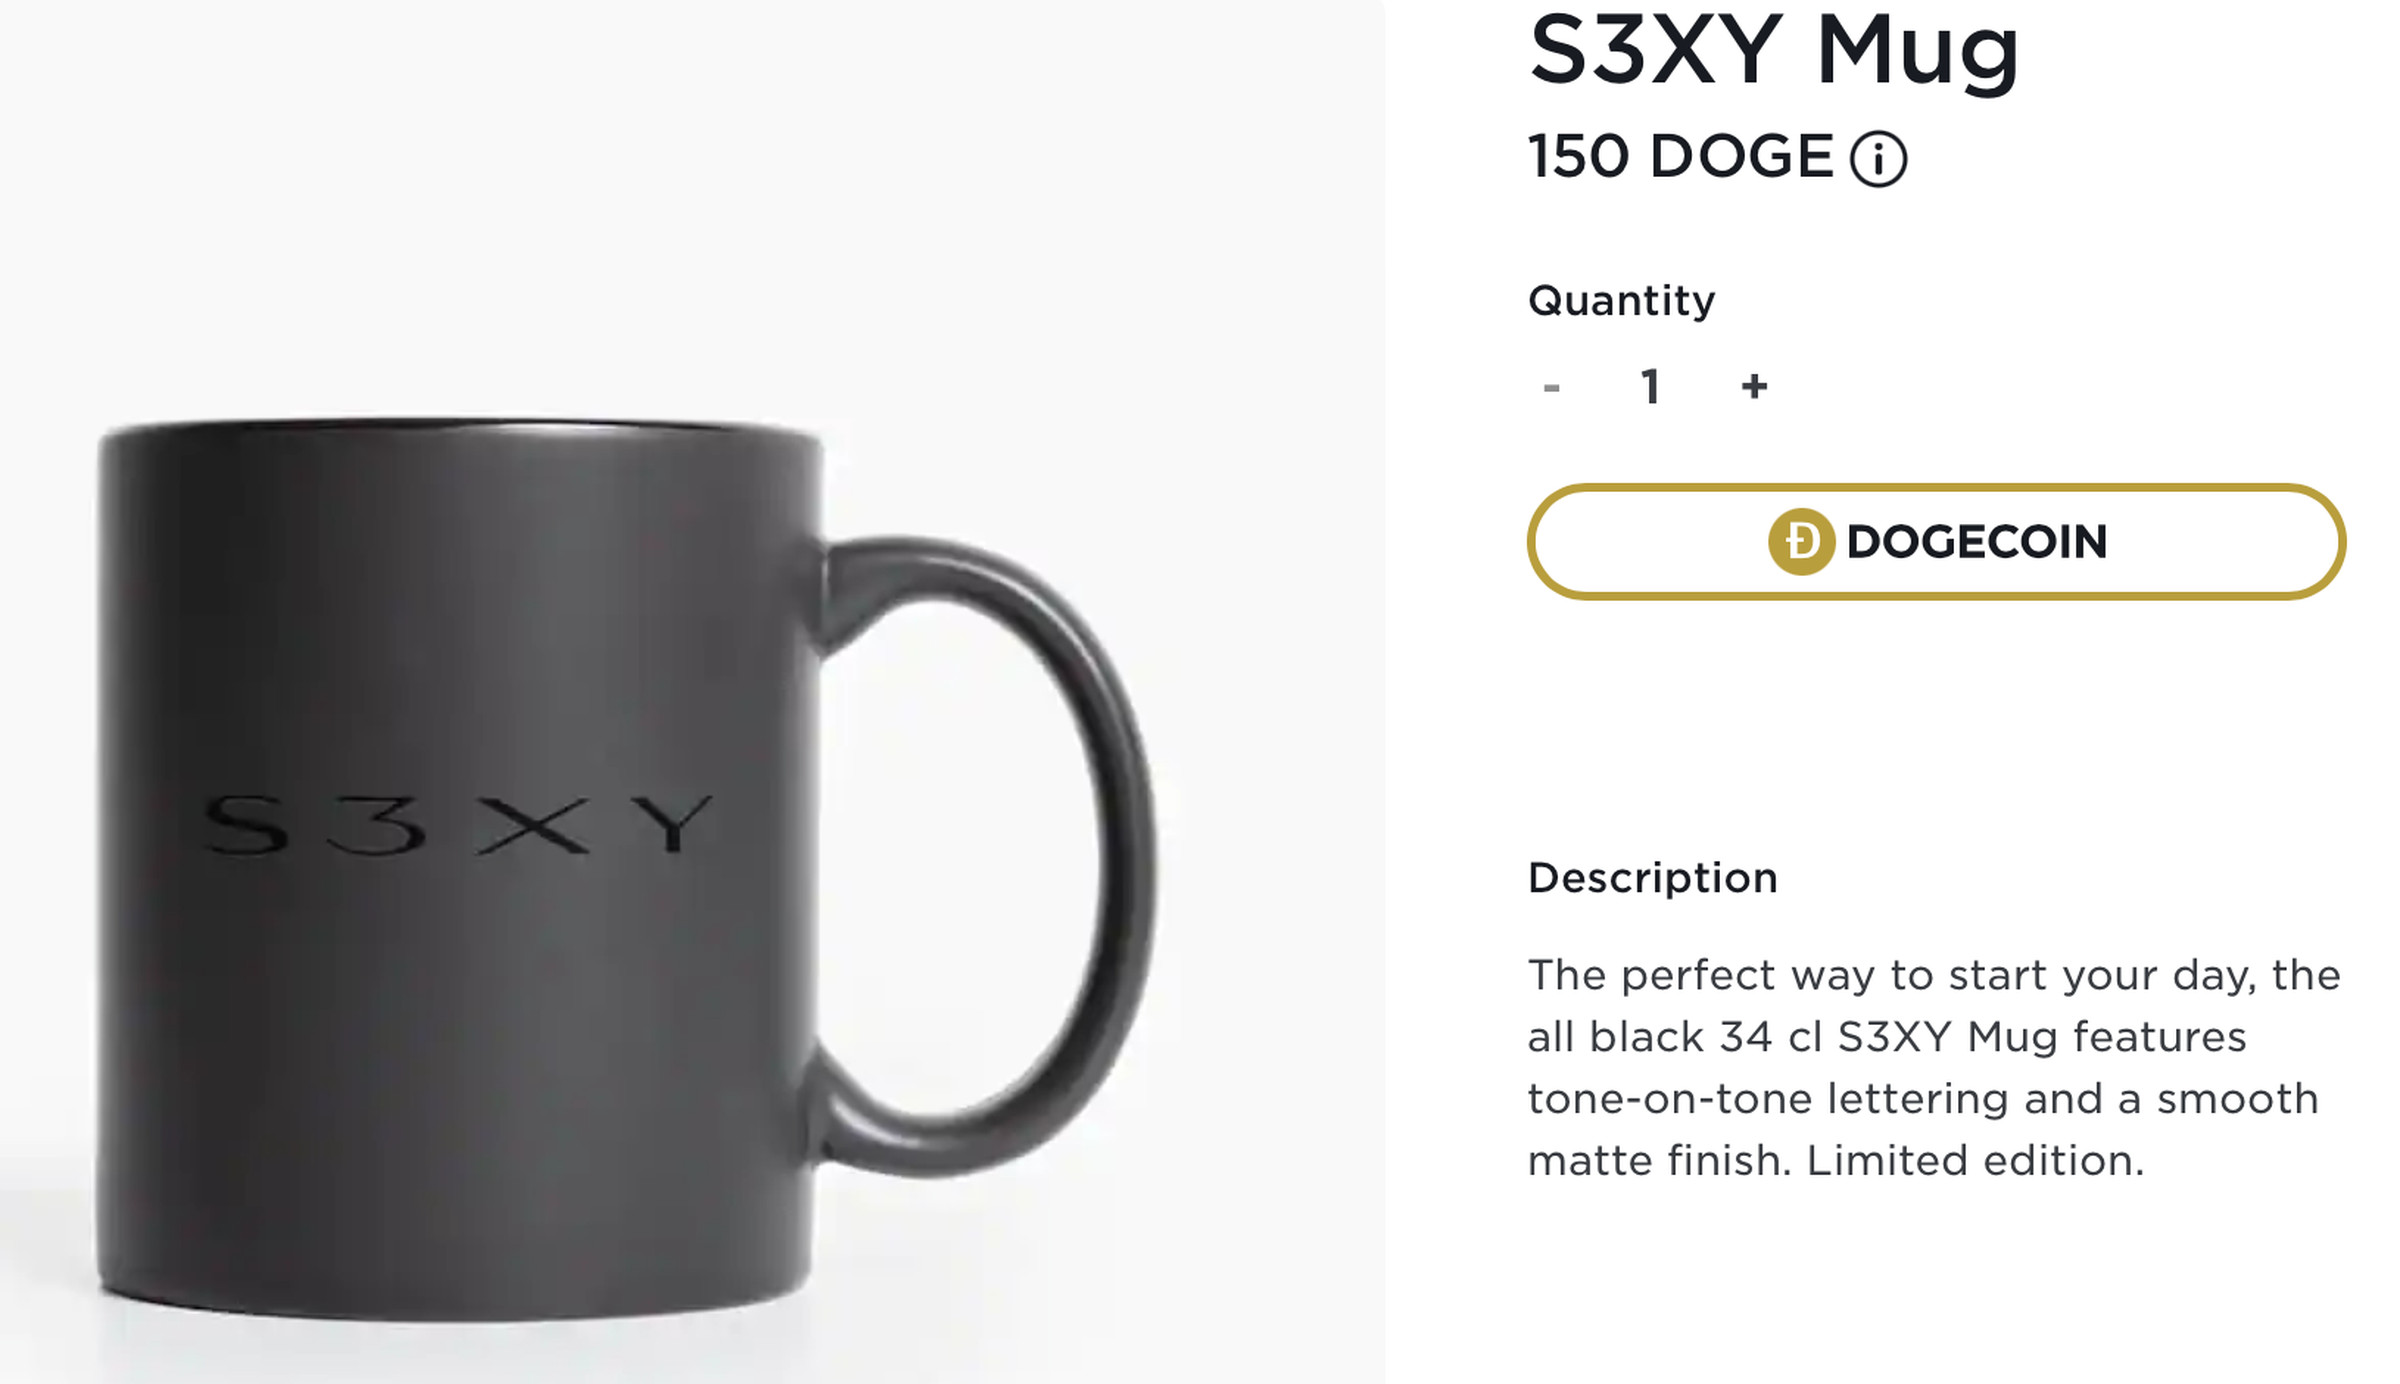 The S3XY Mug, available for 150 doge.